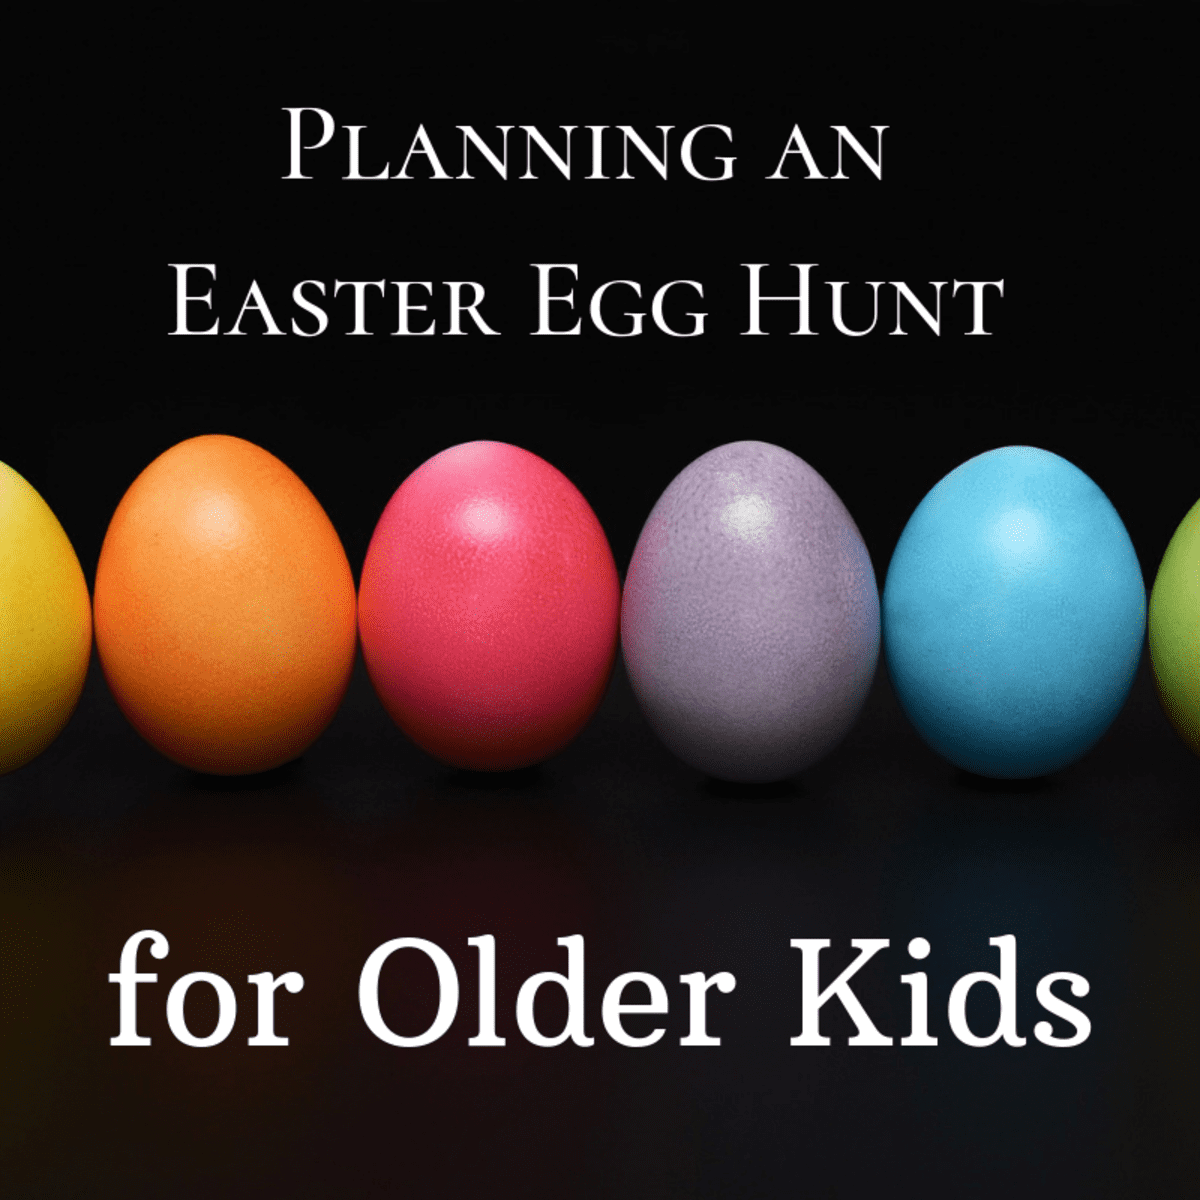 How To Plan An Easter Egg Hunt For Older Kids Holidappy